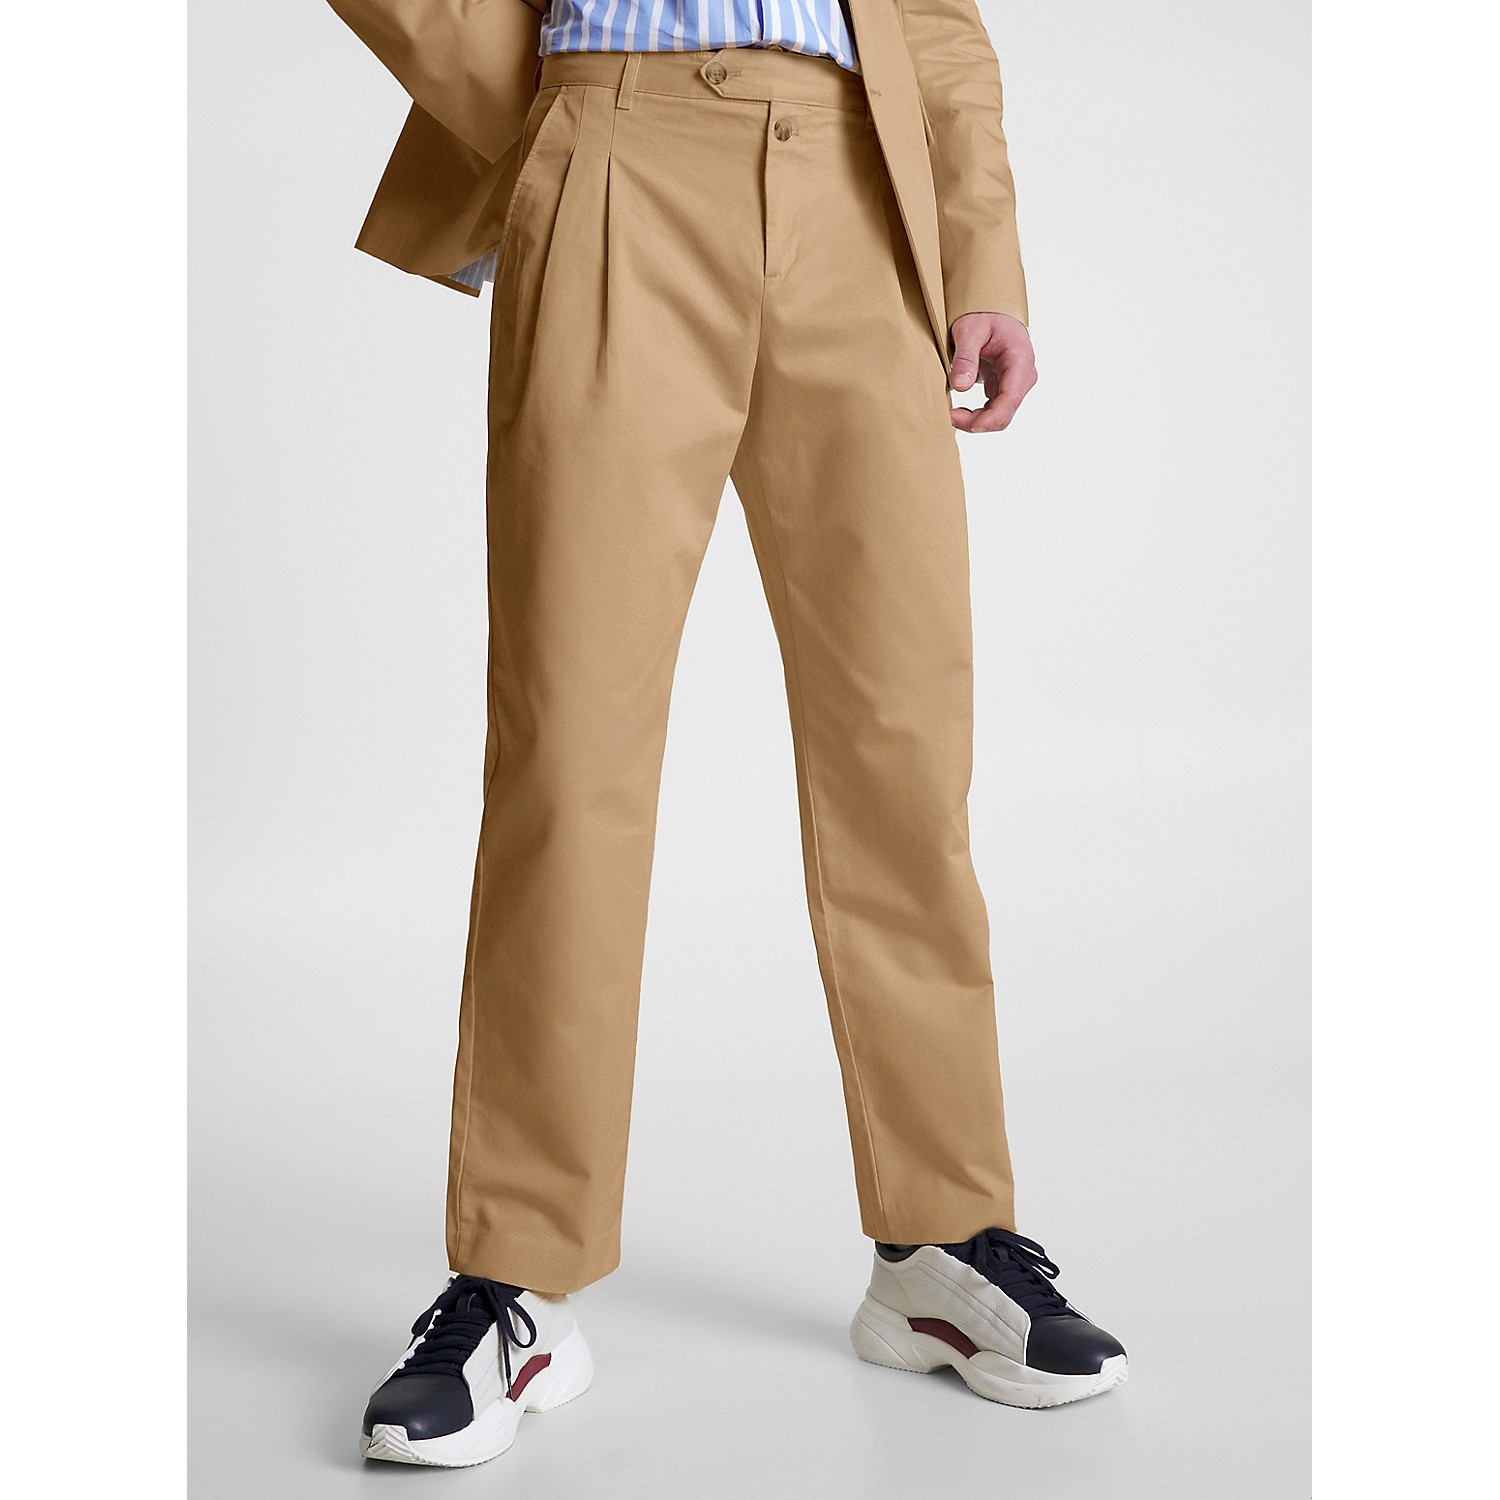 TOMMY HILFIGER Chino Trouser